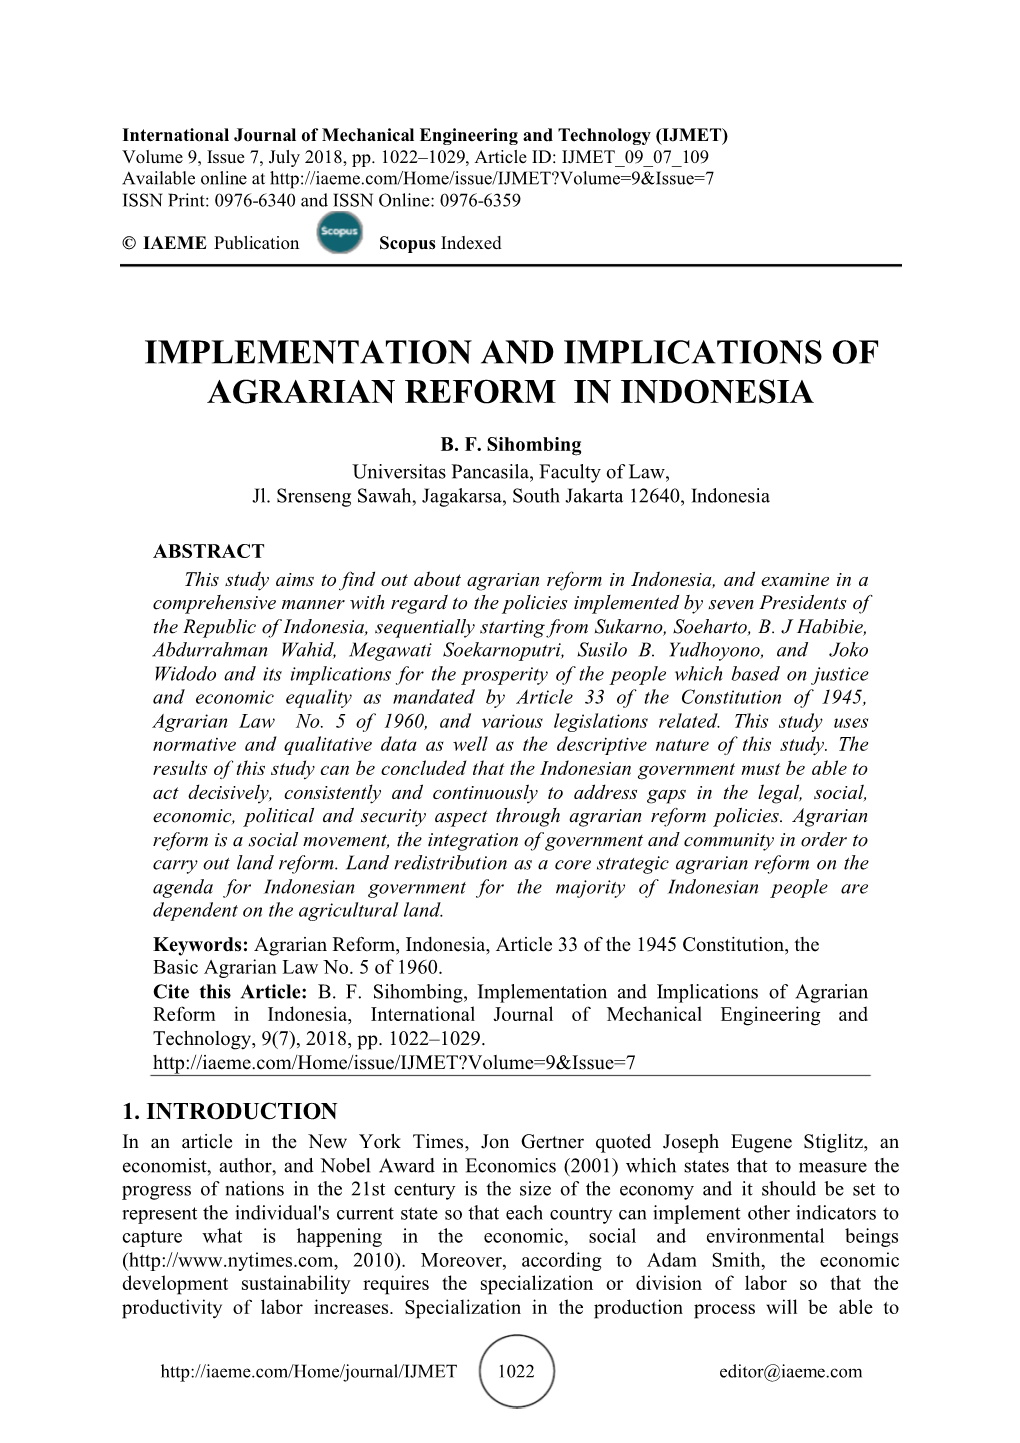 Implementation and Implications of Agrarian Reform in Indonesia